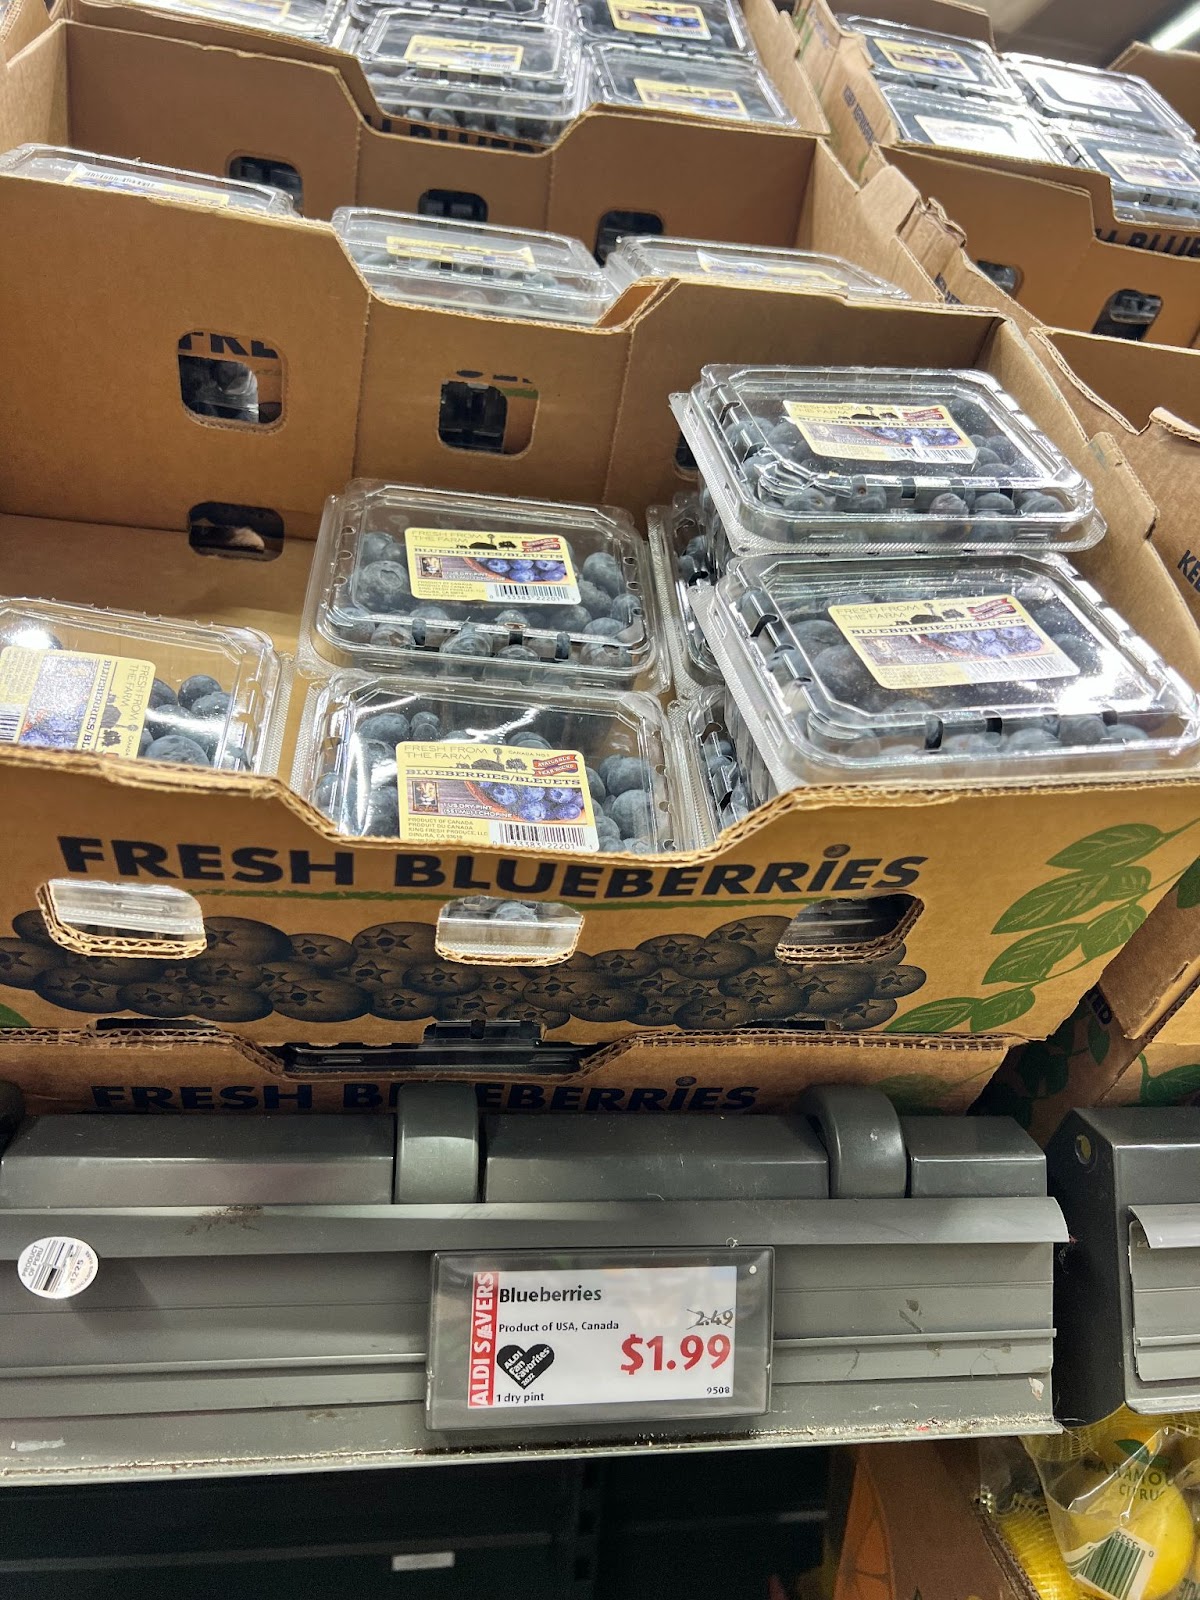 blueberries in a box on a shelf at Aldi